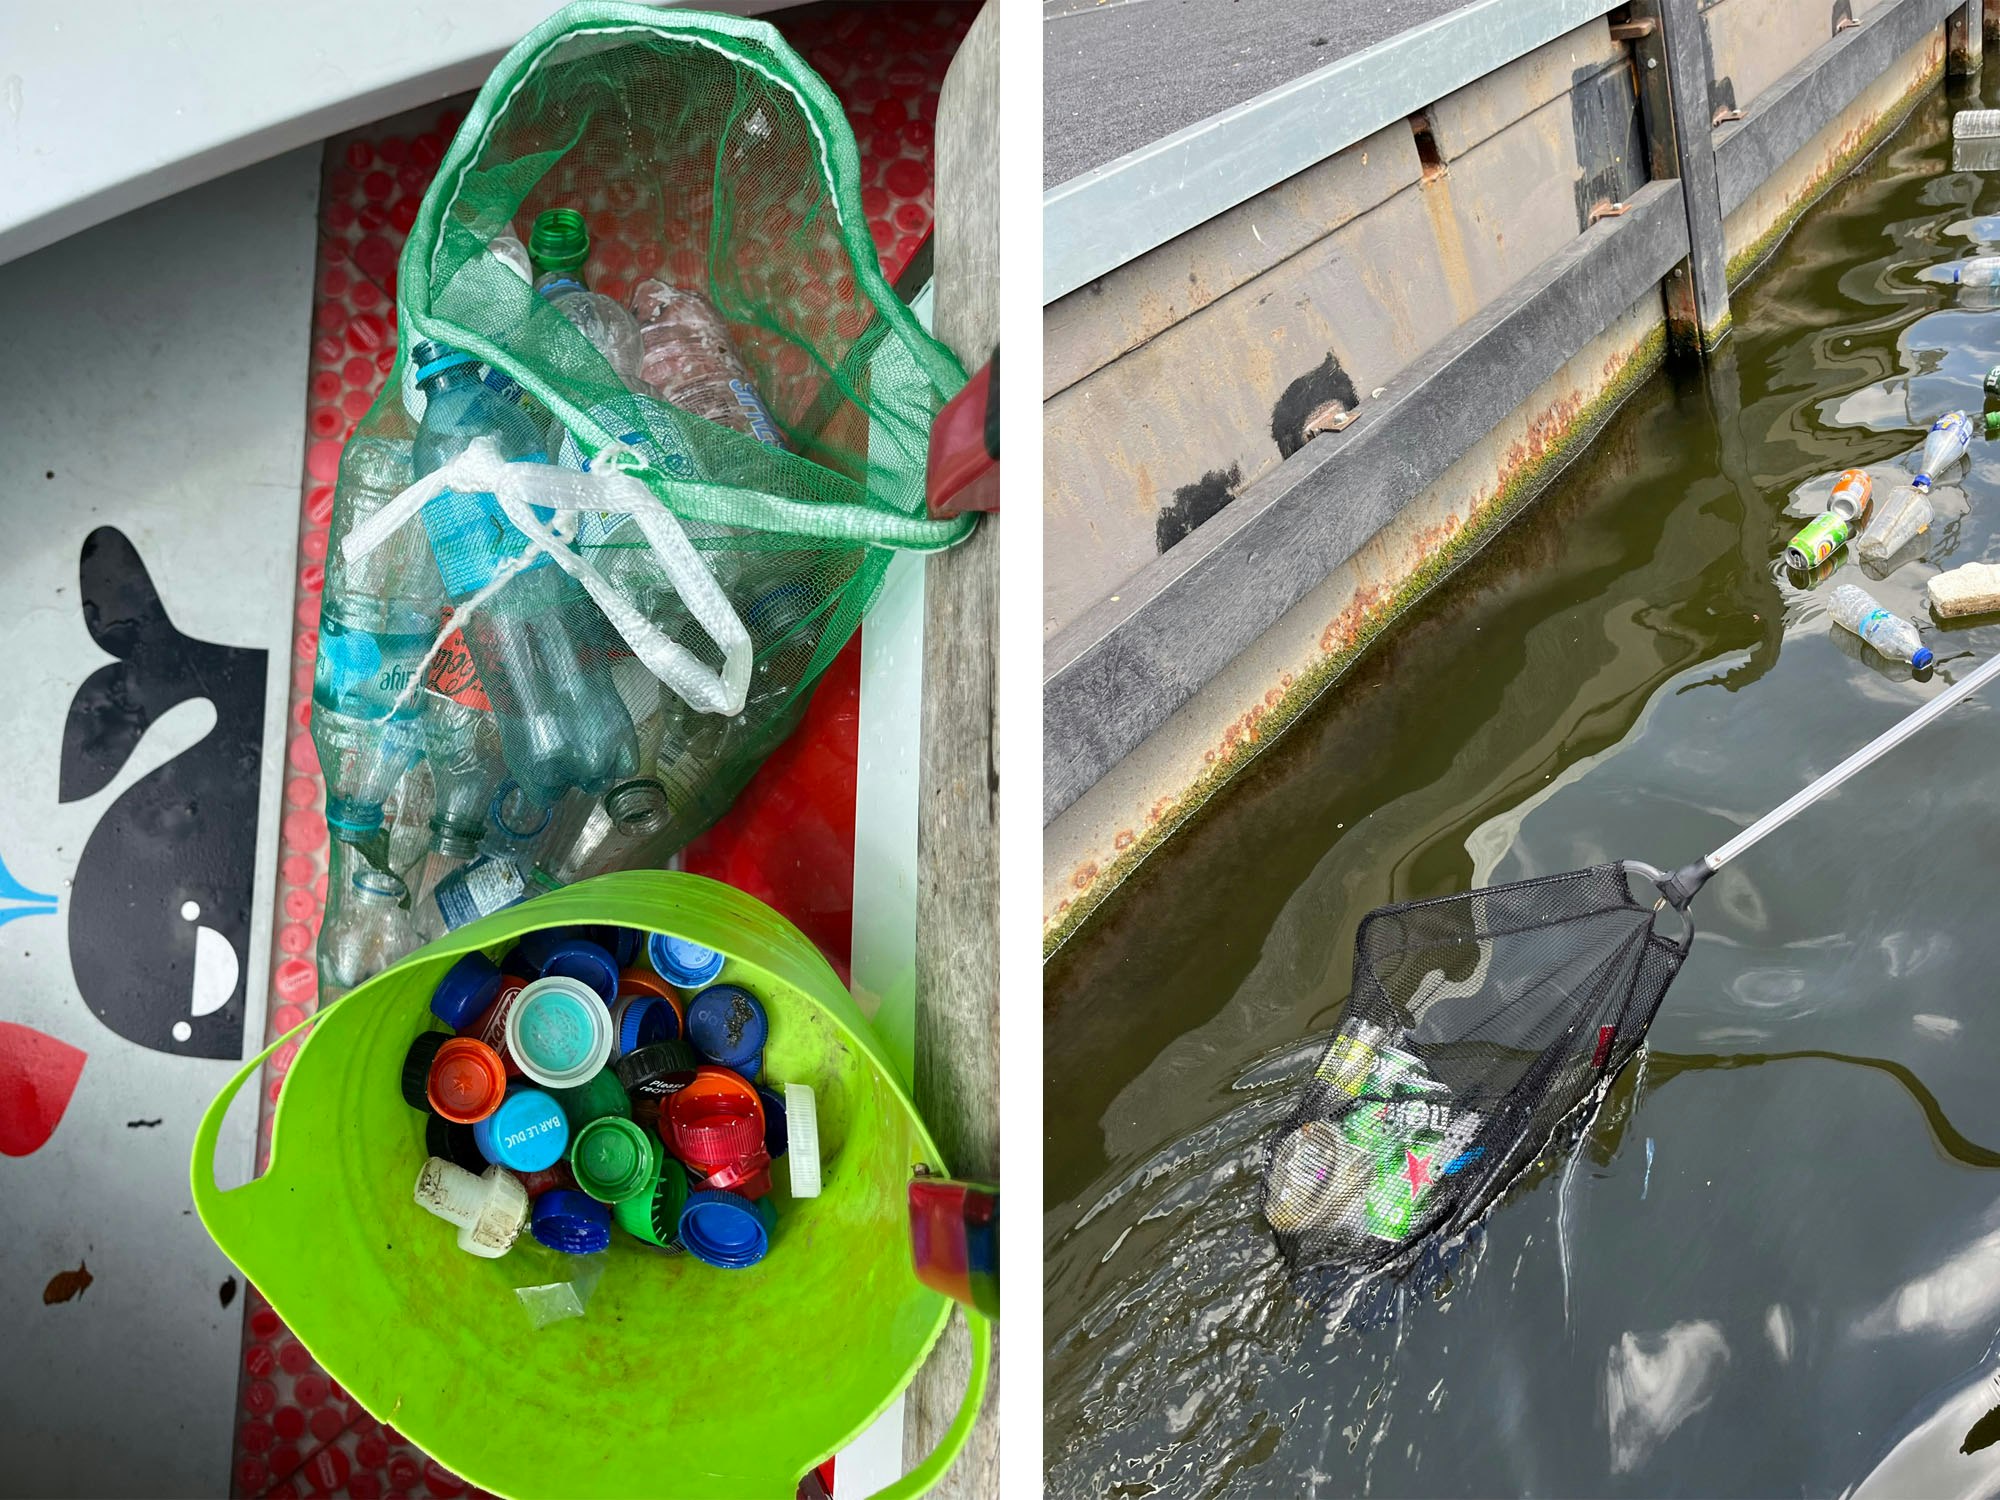 collage; photo 1: plastic bottles float in a canal, photo 2: collected trash in bags on the floor of the boat